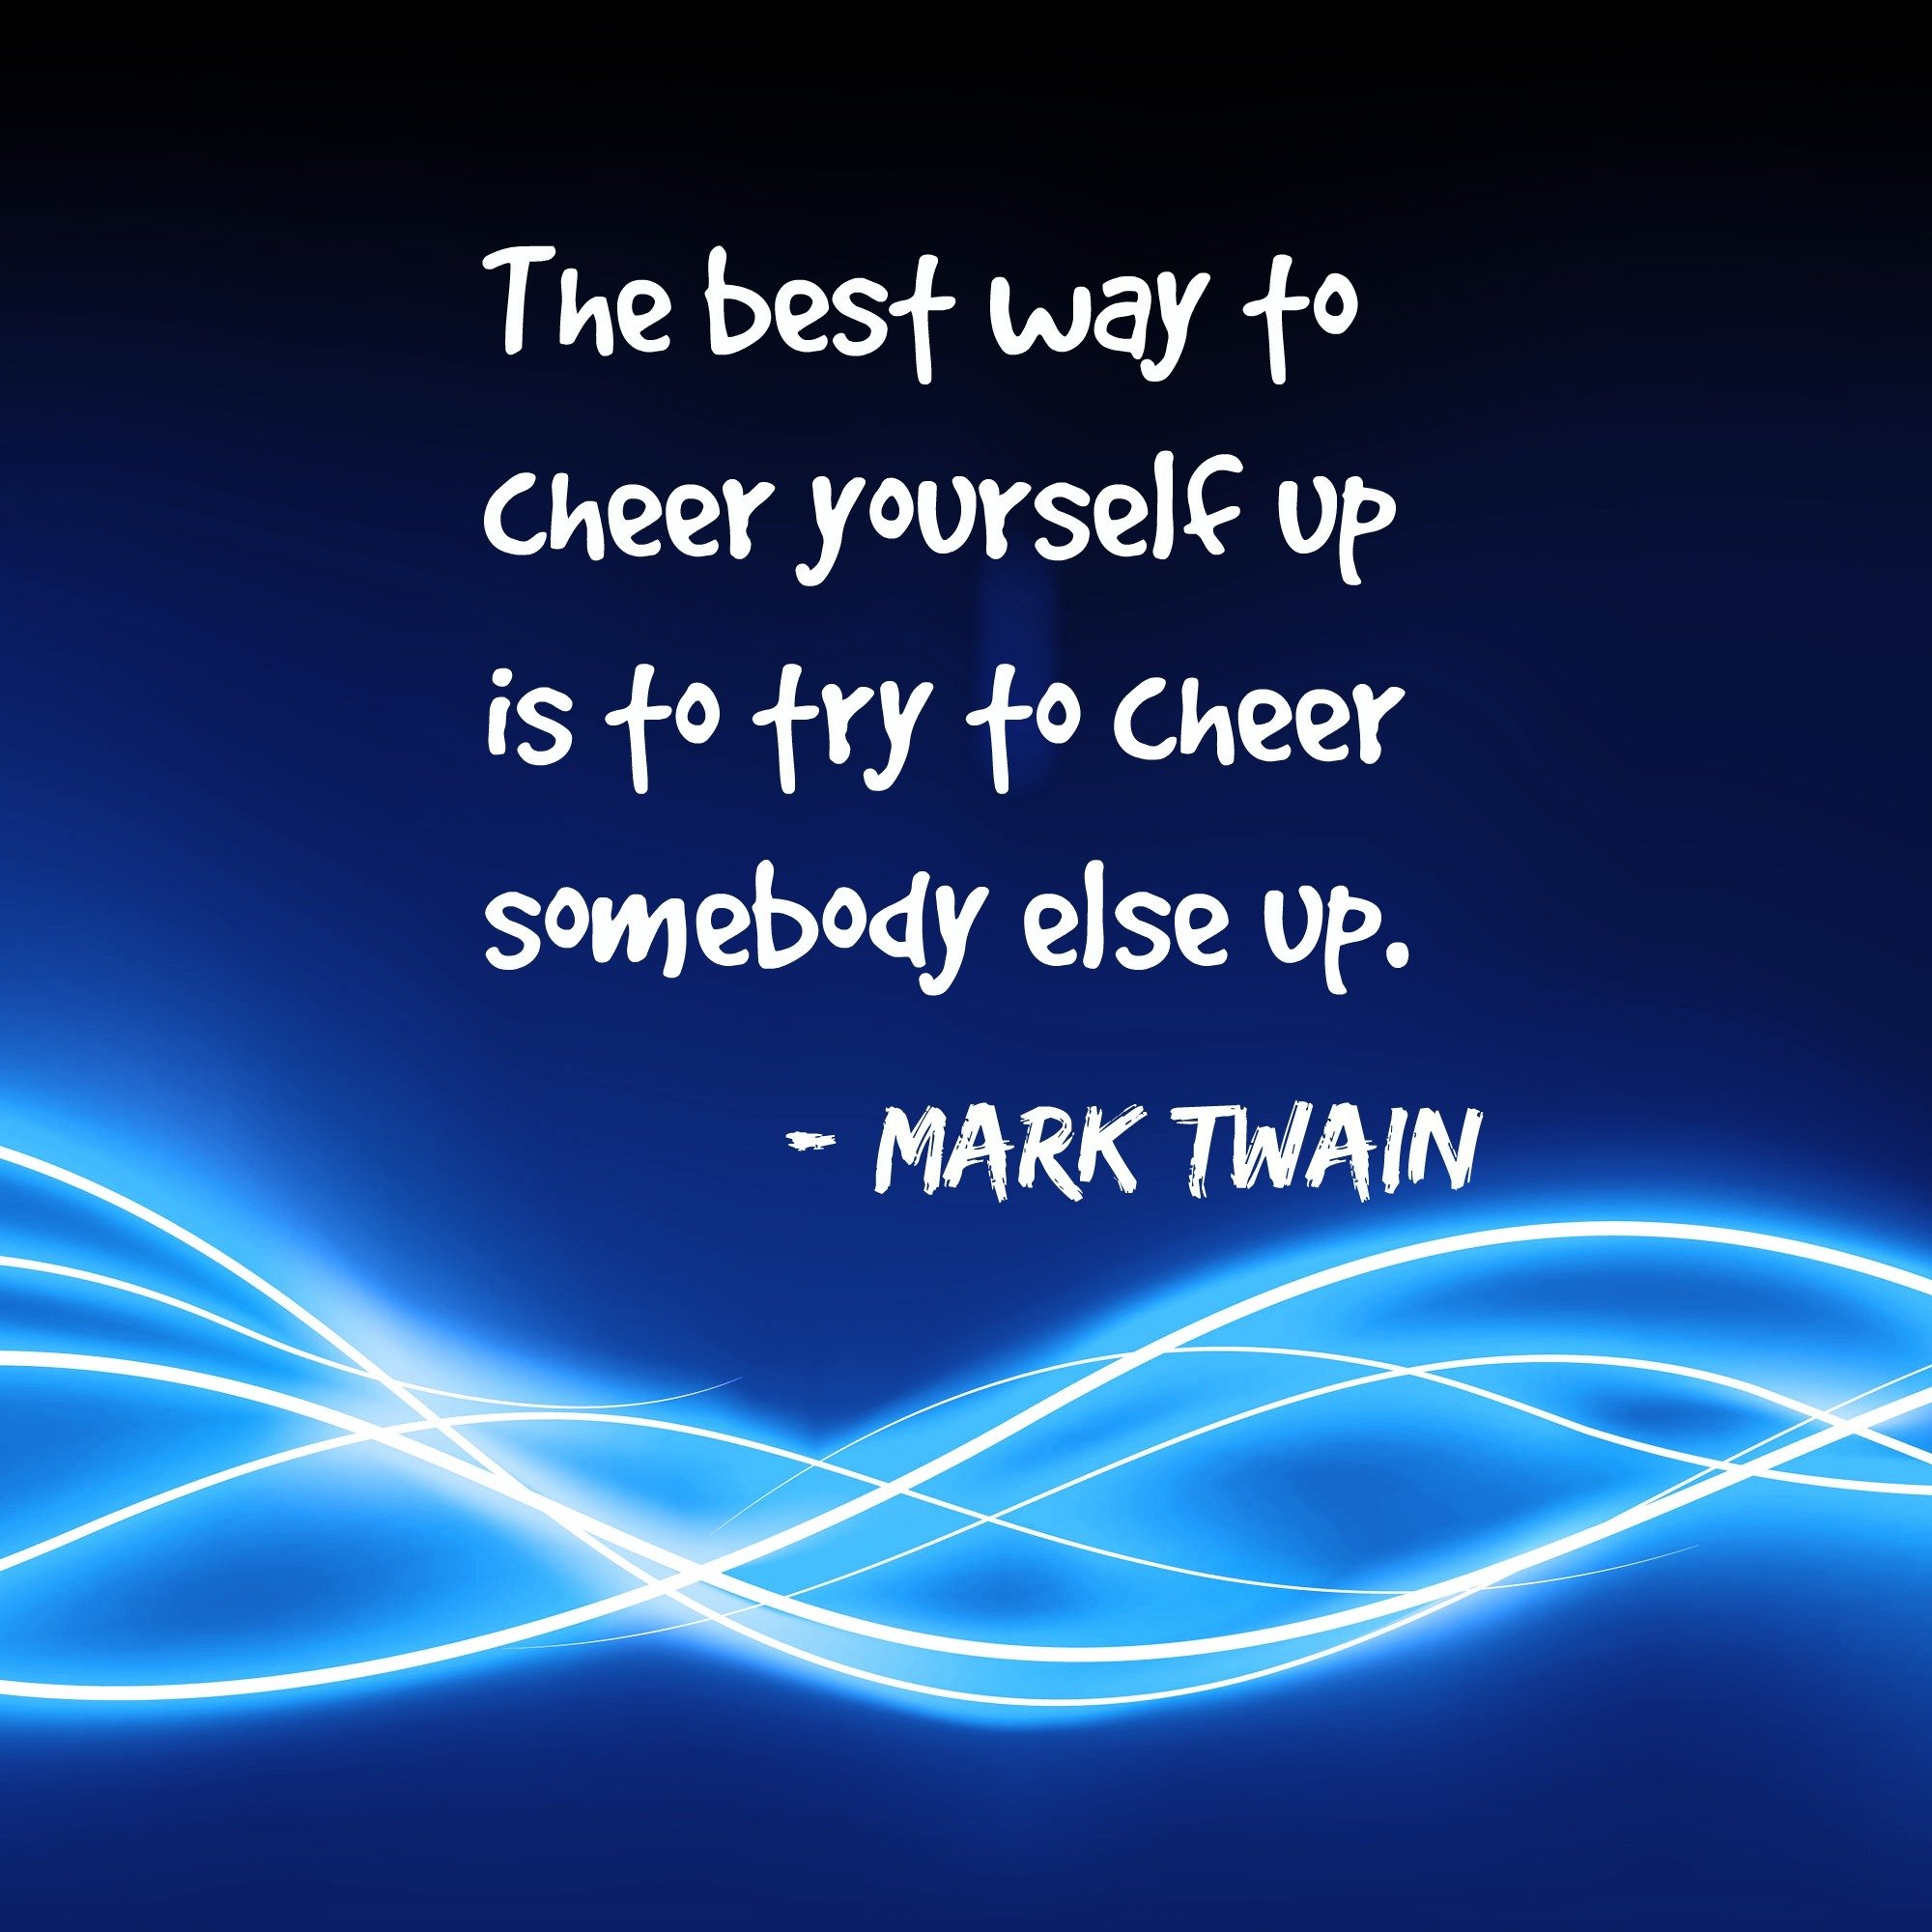 The best way to cheer yourself up is to try and cheer somebody else up